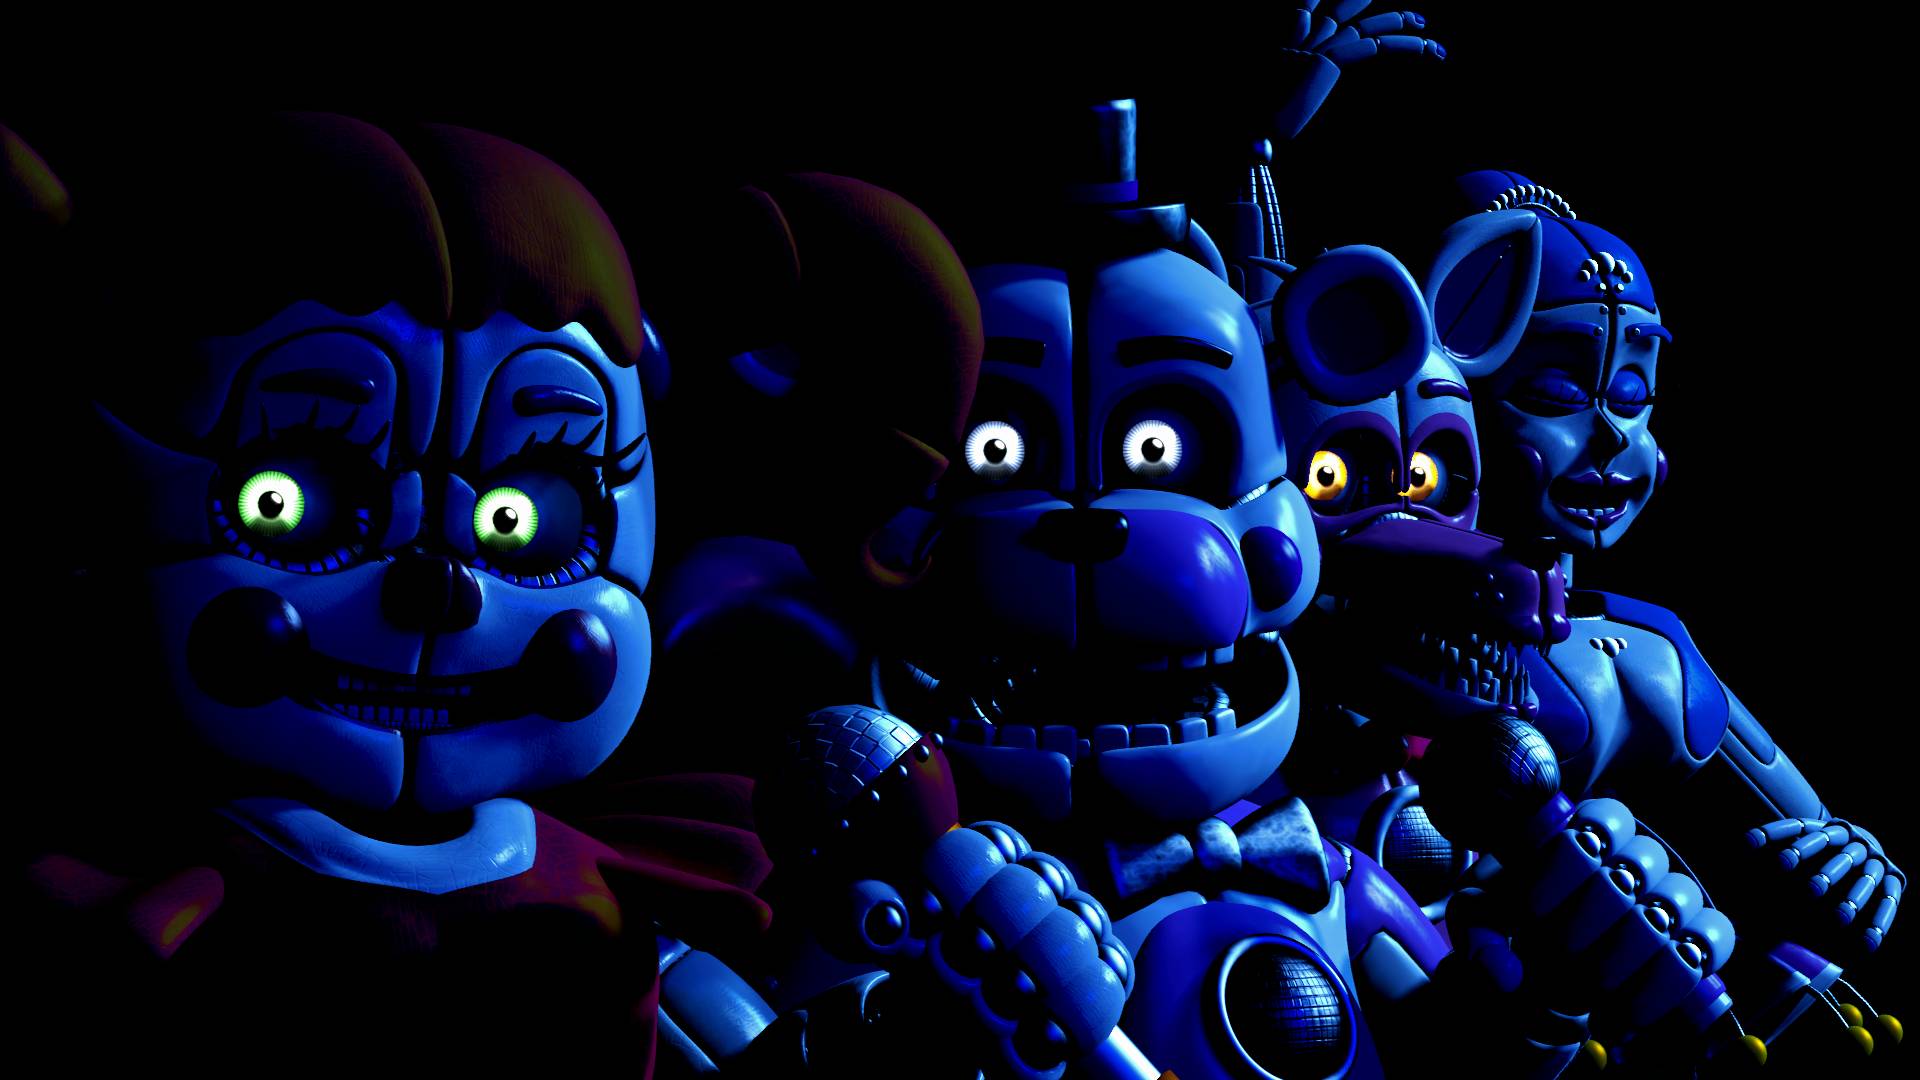 SFM] Five Nights at Freddy's 4 - 5th Anniversary by Mountroid on DeviantArt